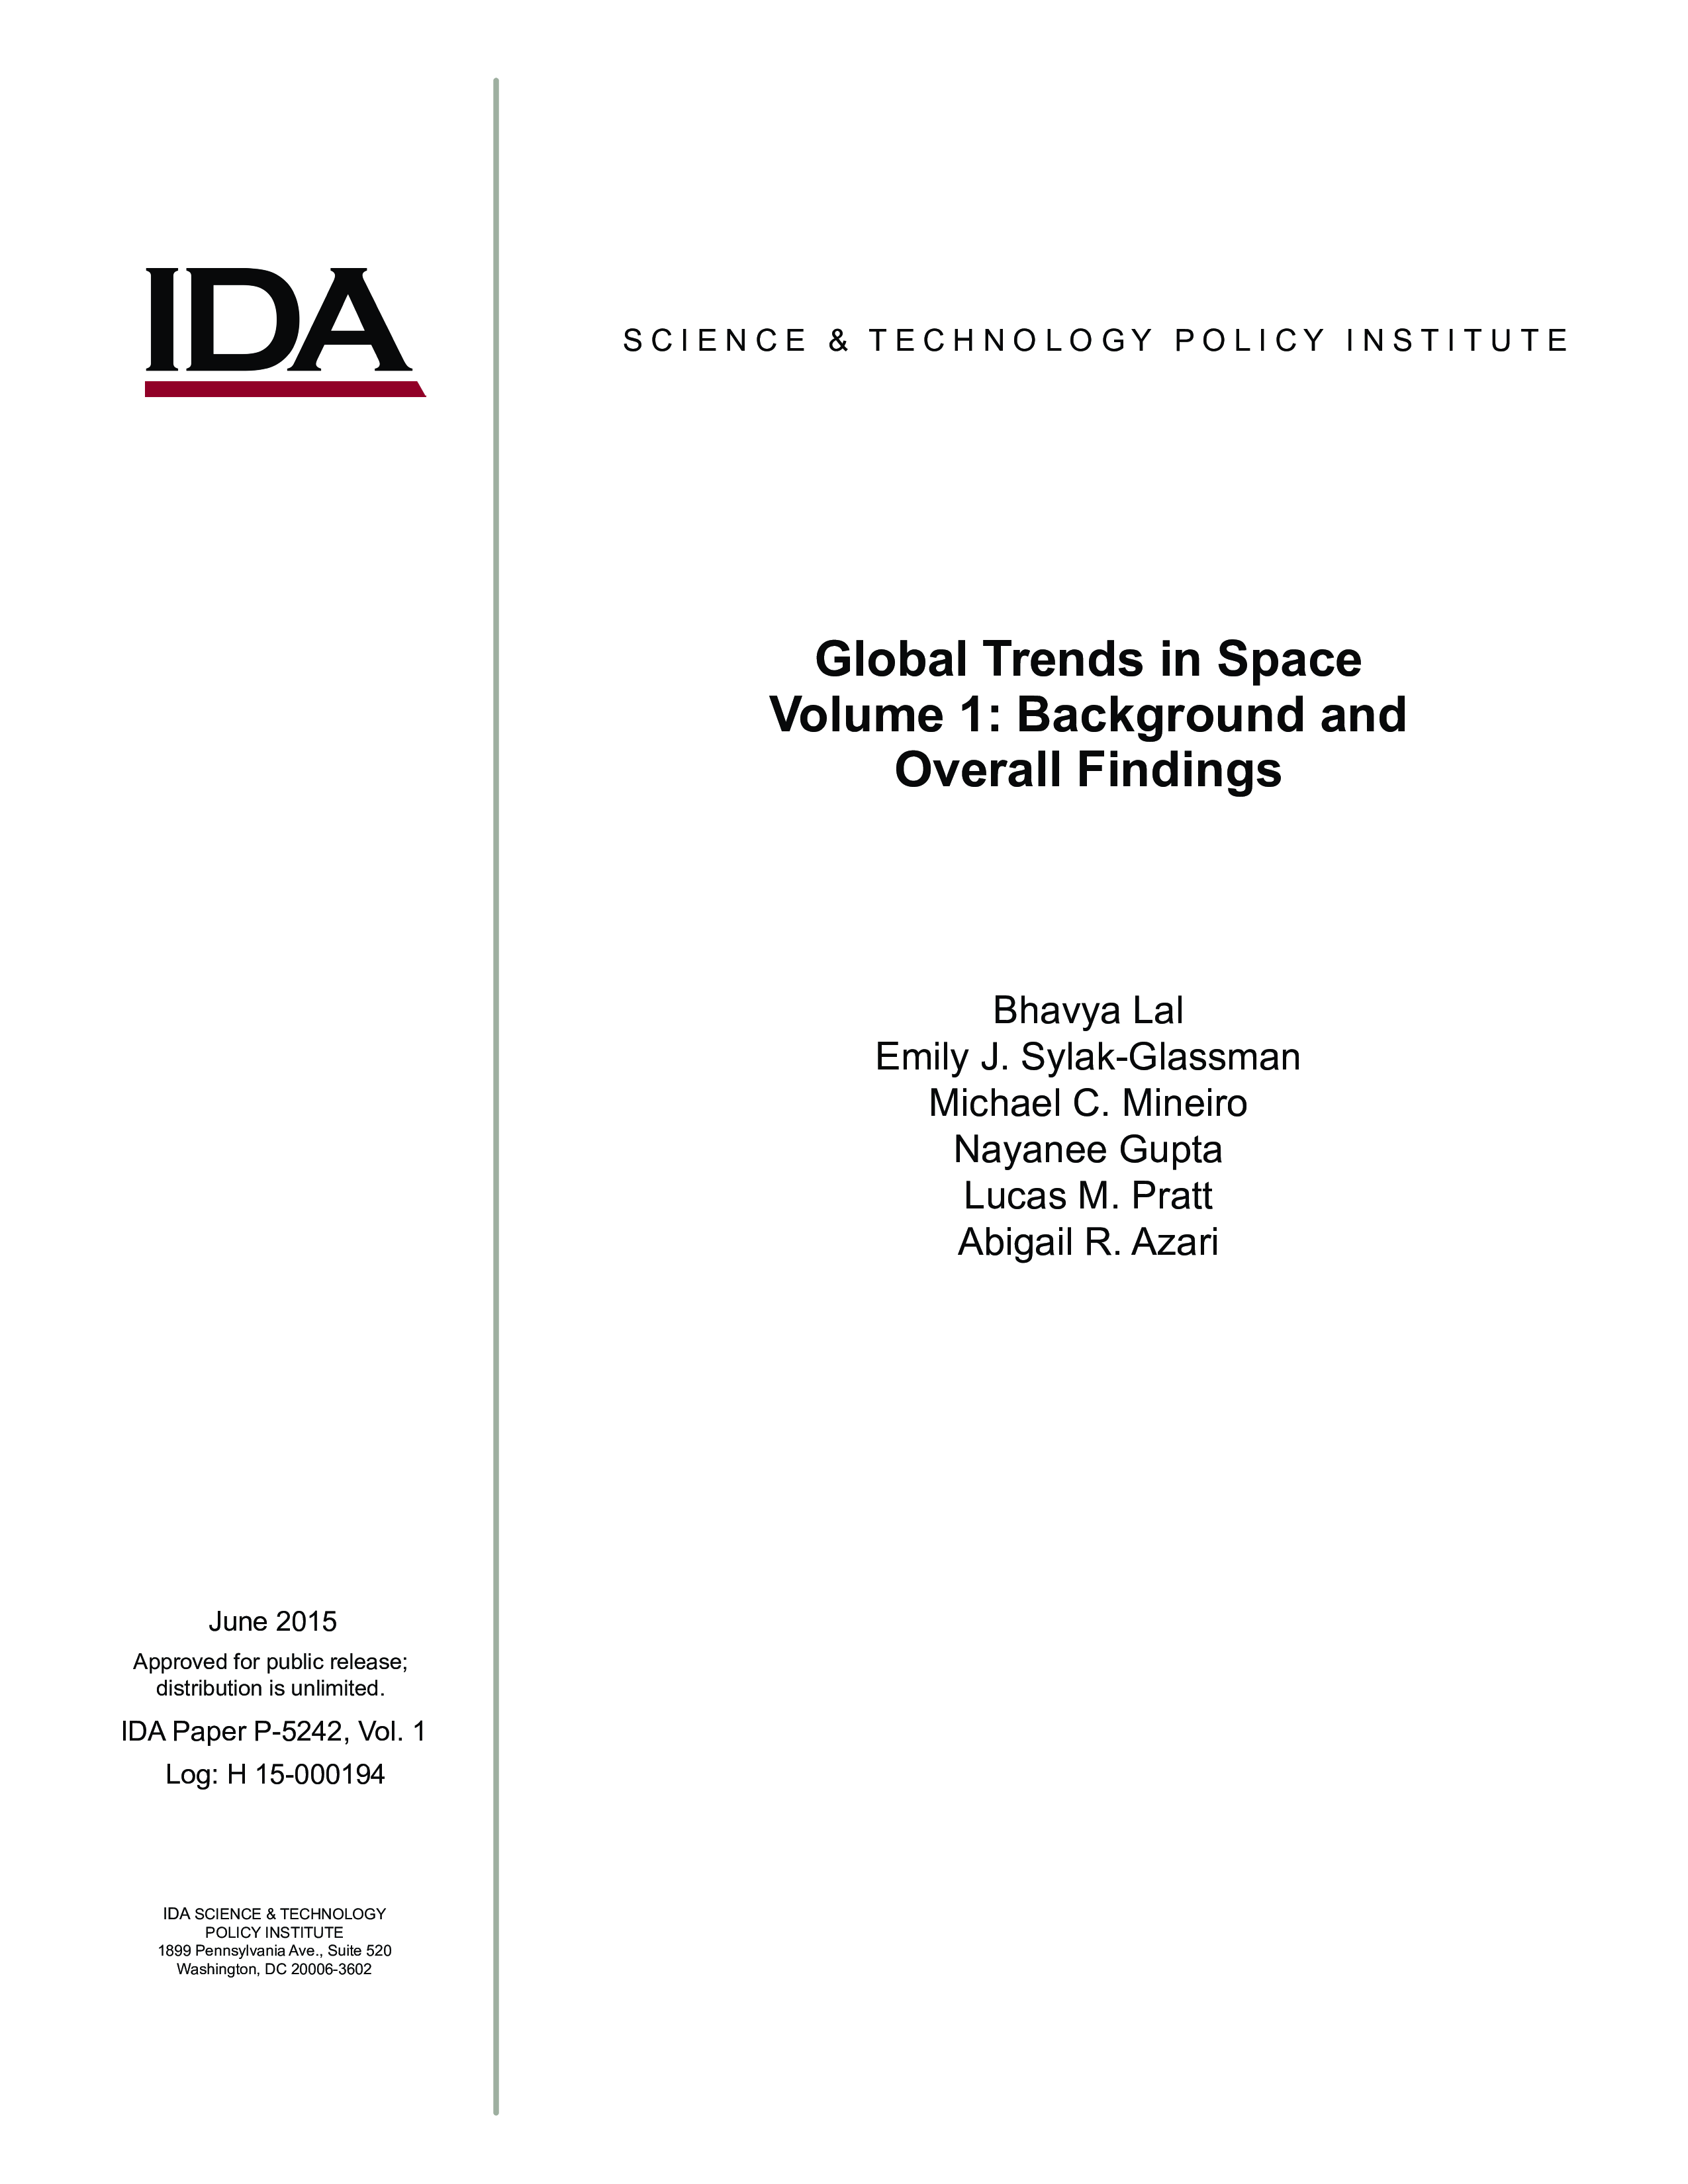 Global Trends in Space, Volume 1: Background and Overall Findings